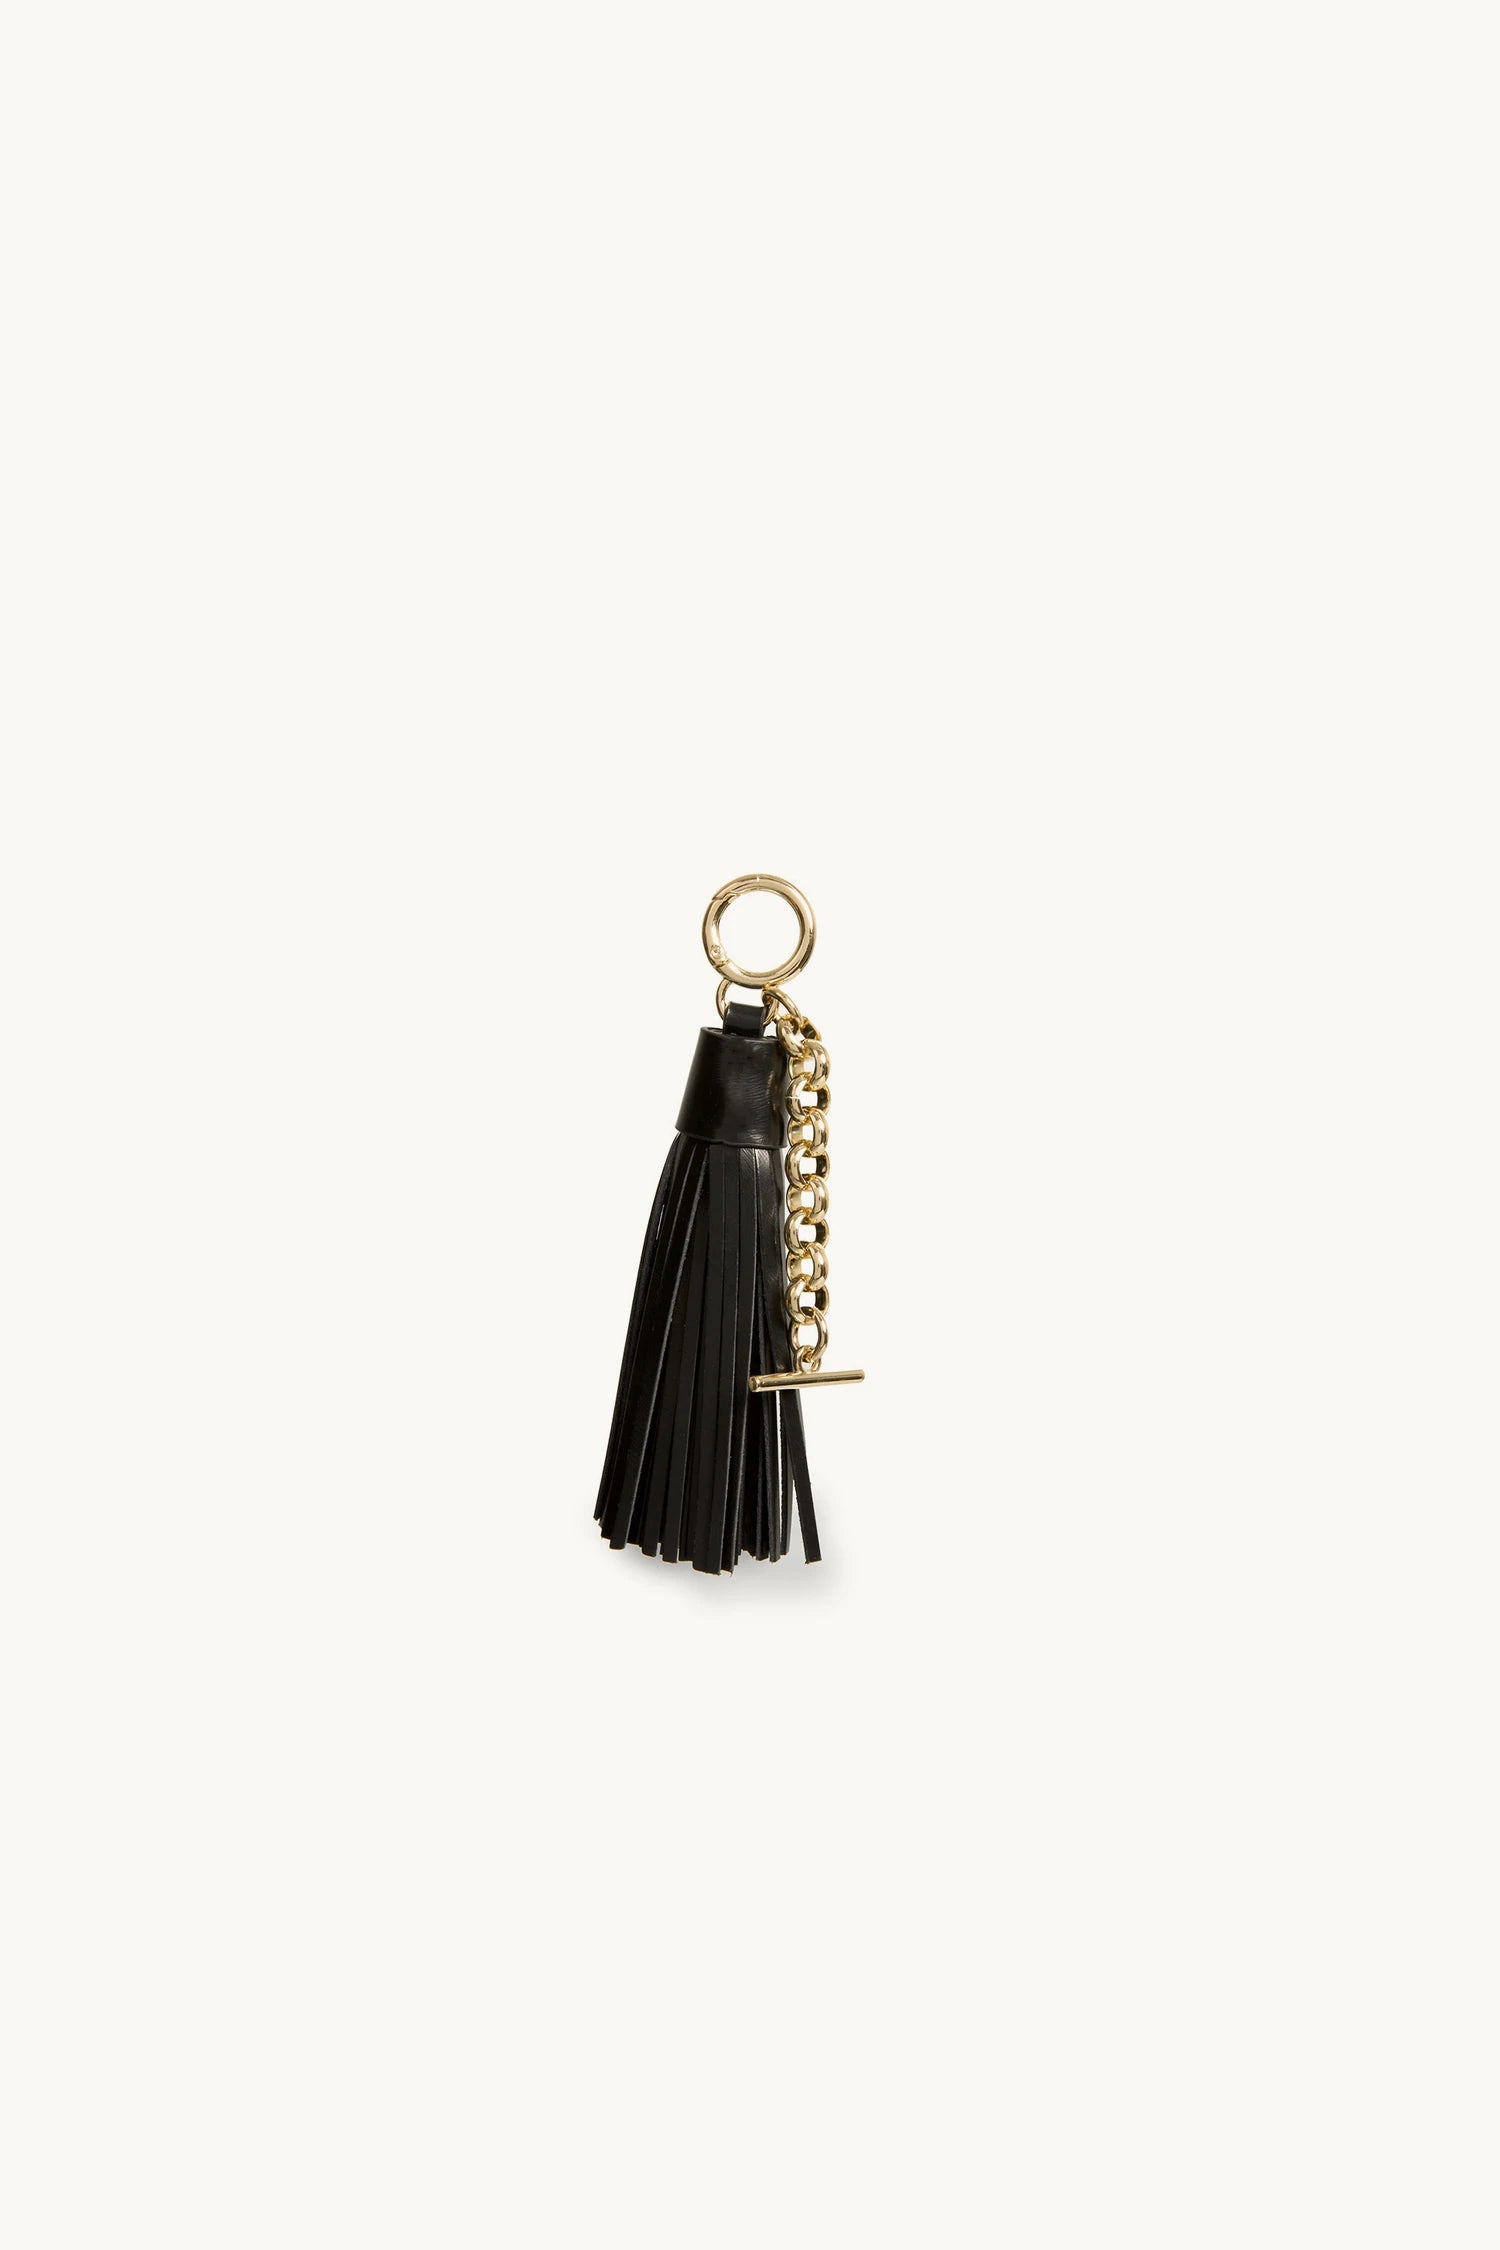 The Harlow Lux Keychain - Light Gold